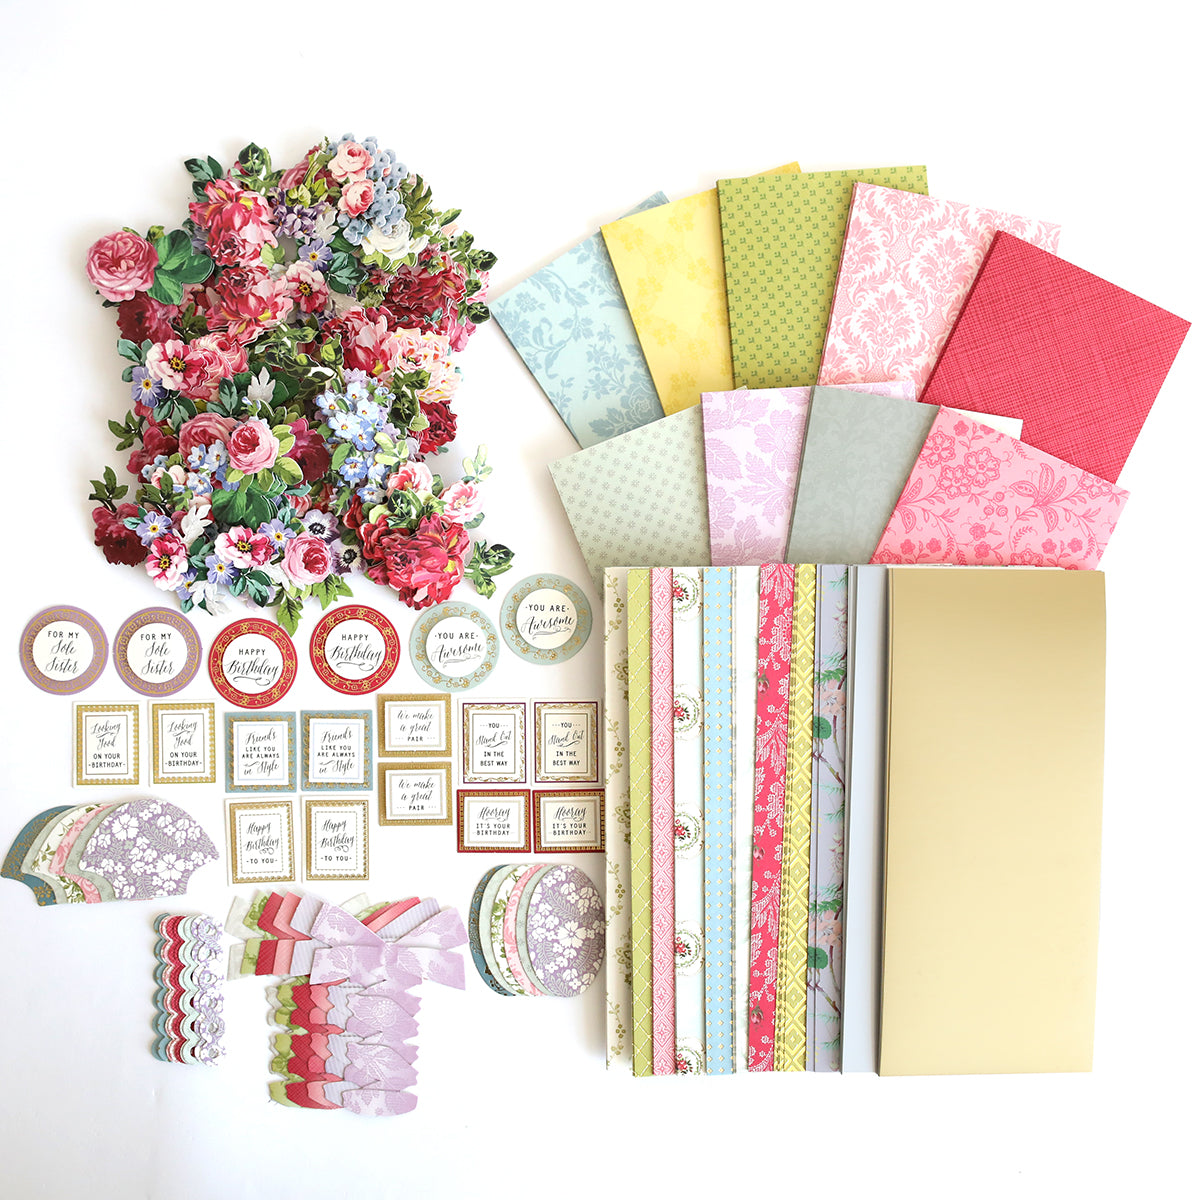 Assorted Paper Sneakers Refill Kit including patterned papers, stickers, 3D sentiments, and decorative elements arranged in layers on a white background.